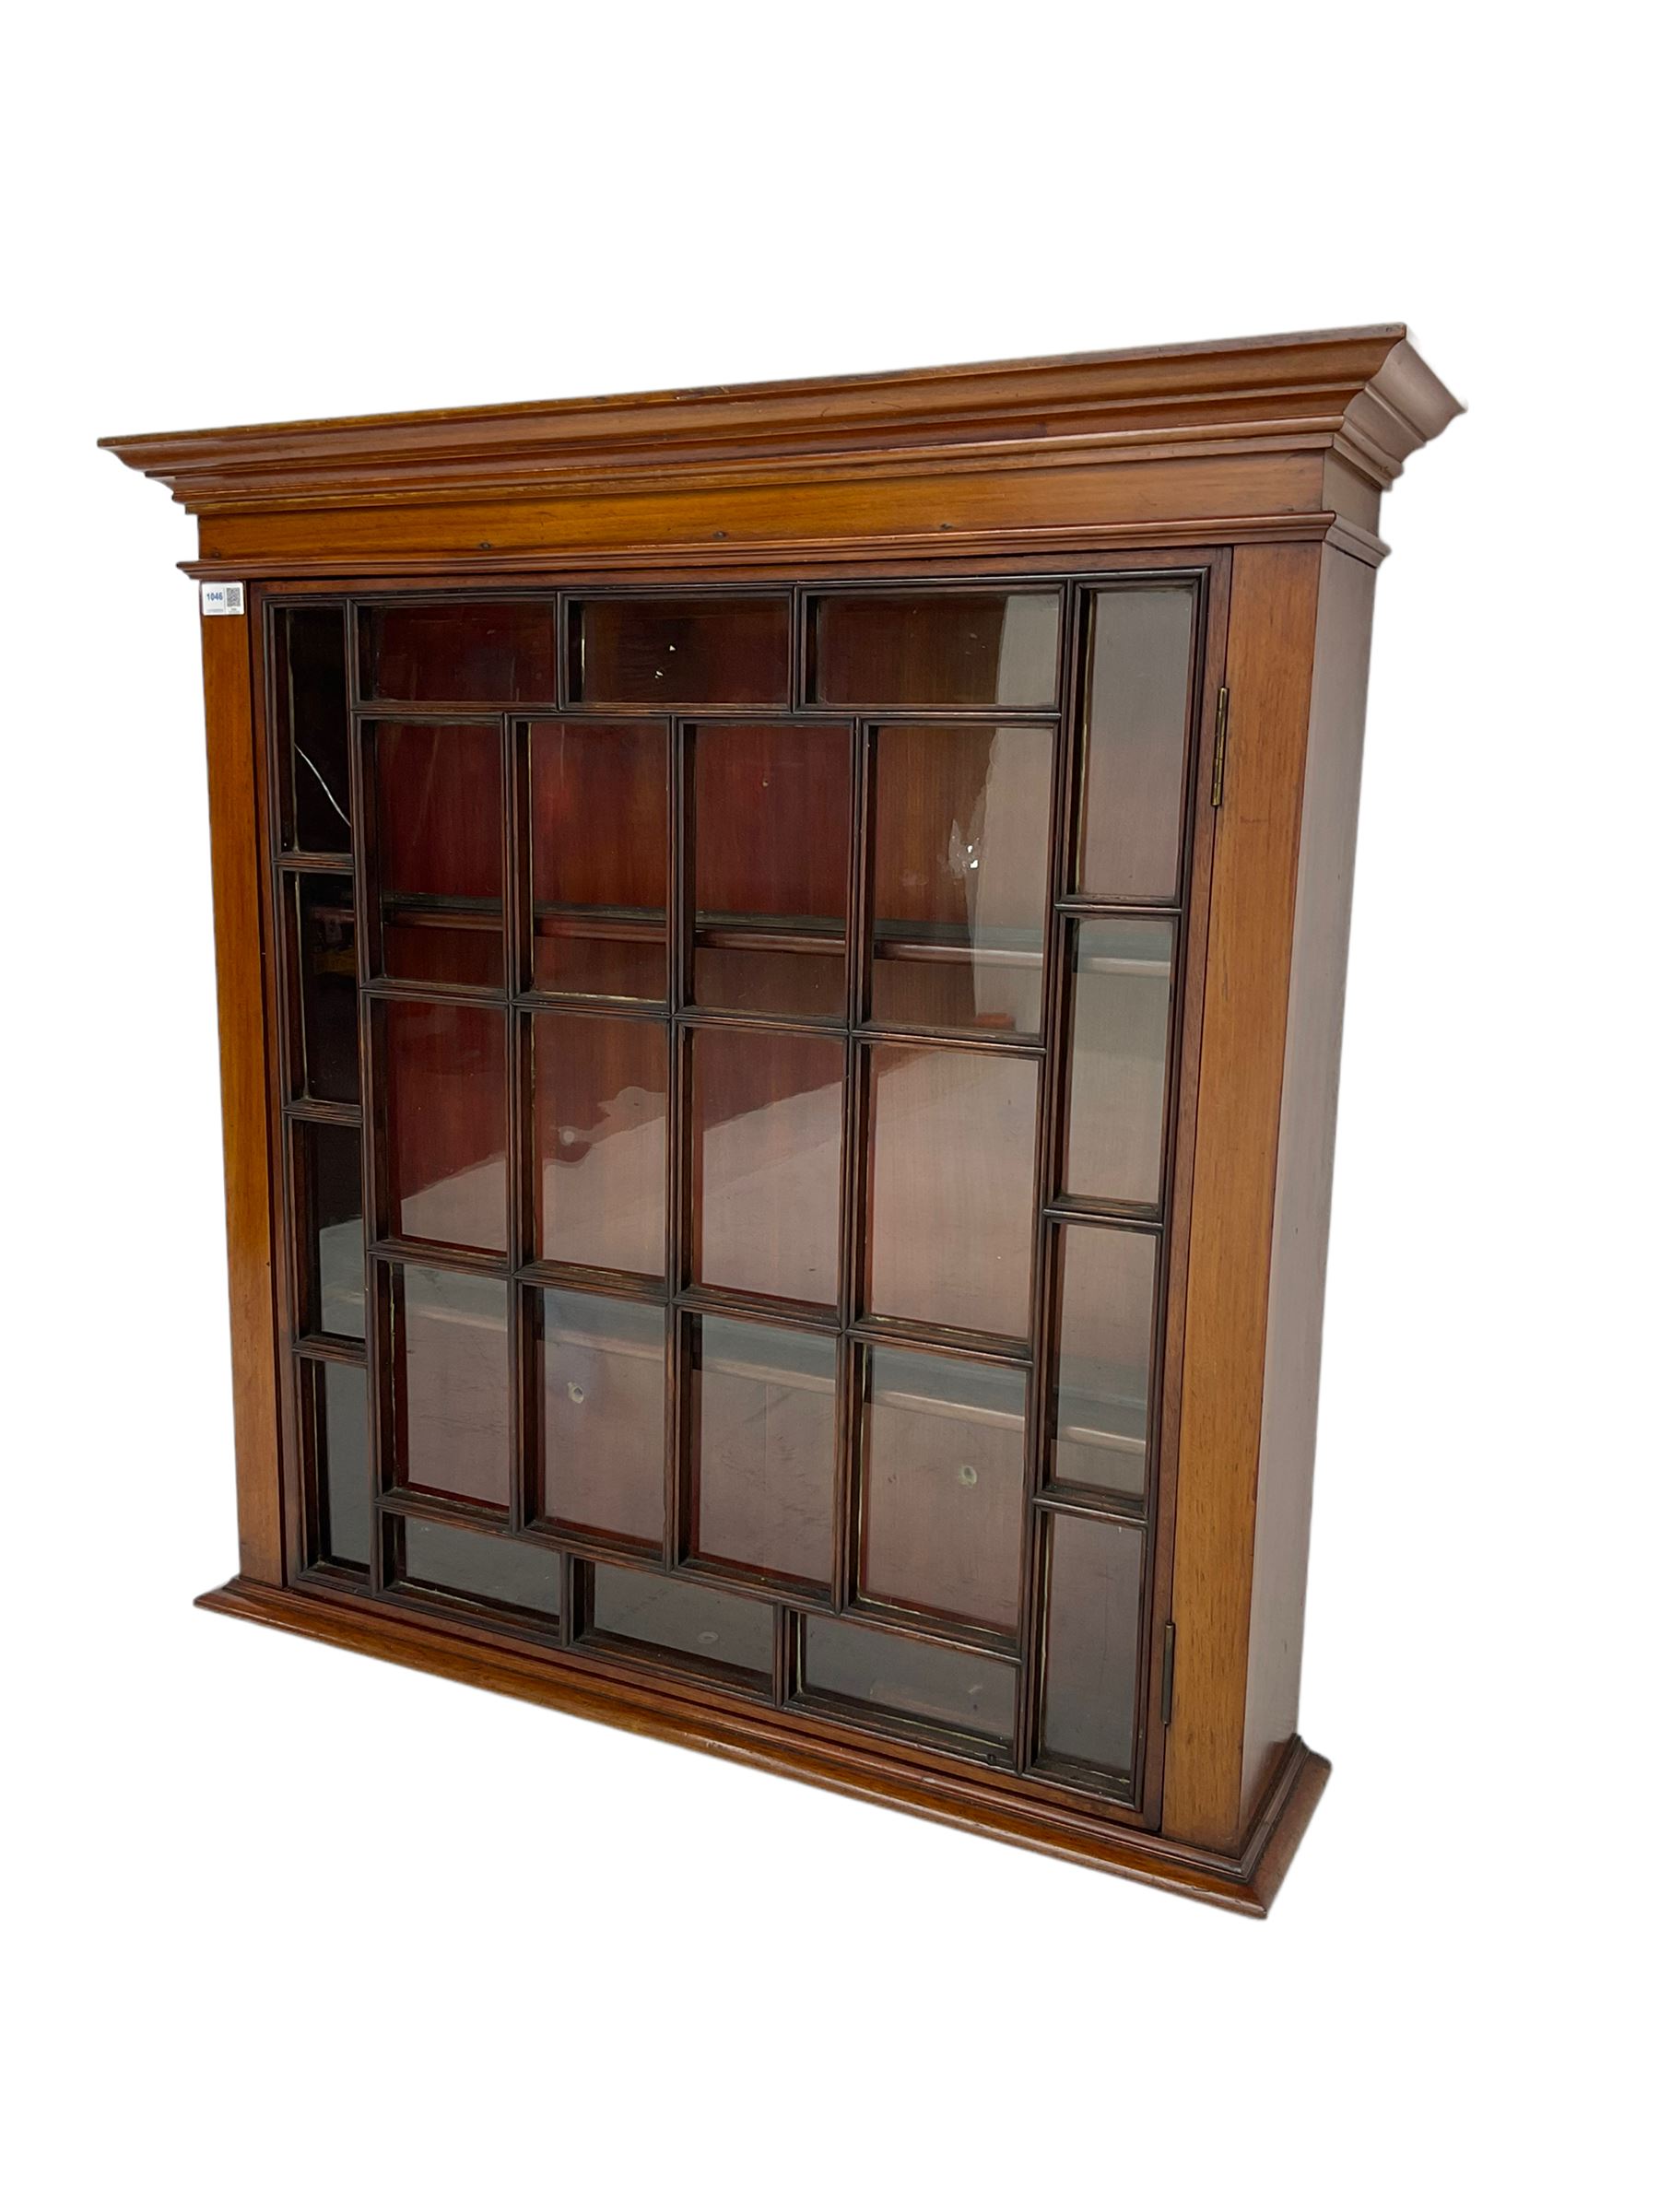 Early 20th century mahogany wall hanging cabinet - Image 5 of 6